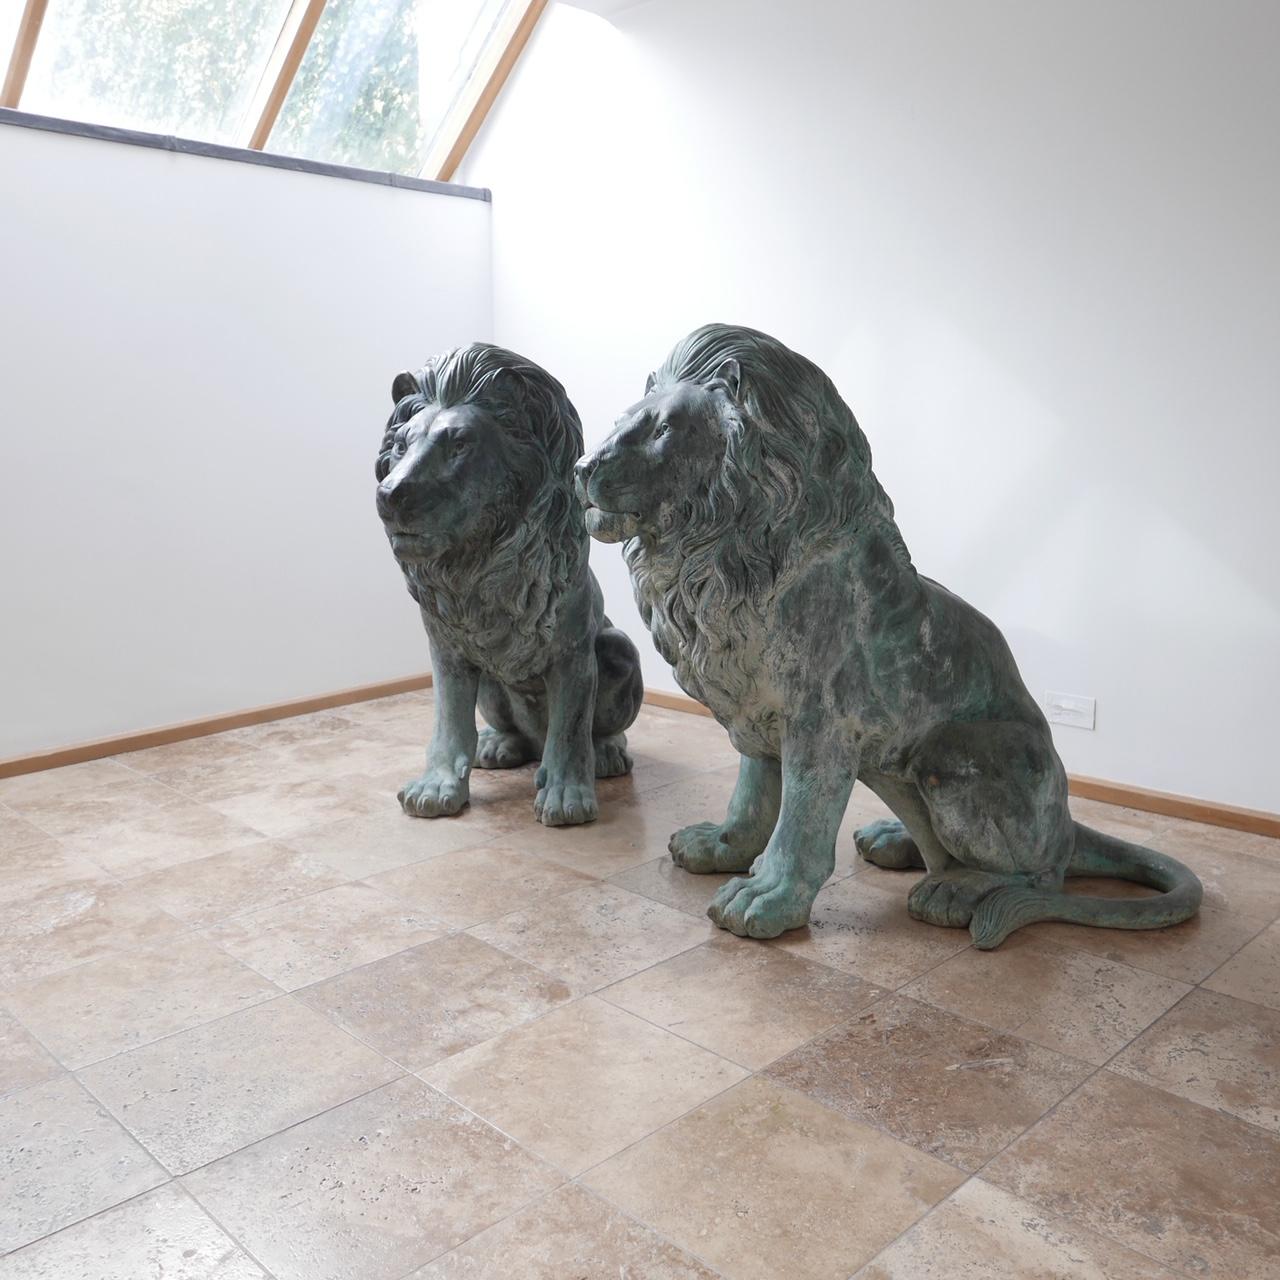 A pair of stunning substantial garden bronze lions, 

Italian, late 20th century. 

Stunning patina, size and quality. 

Dimensions: 140 D x 63 W x 127 H in cm.

Delivery: POA due to size. 

Collection or viewing can be arranged at our